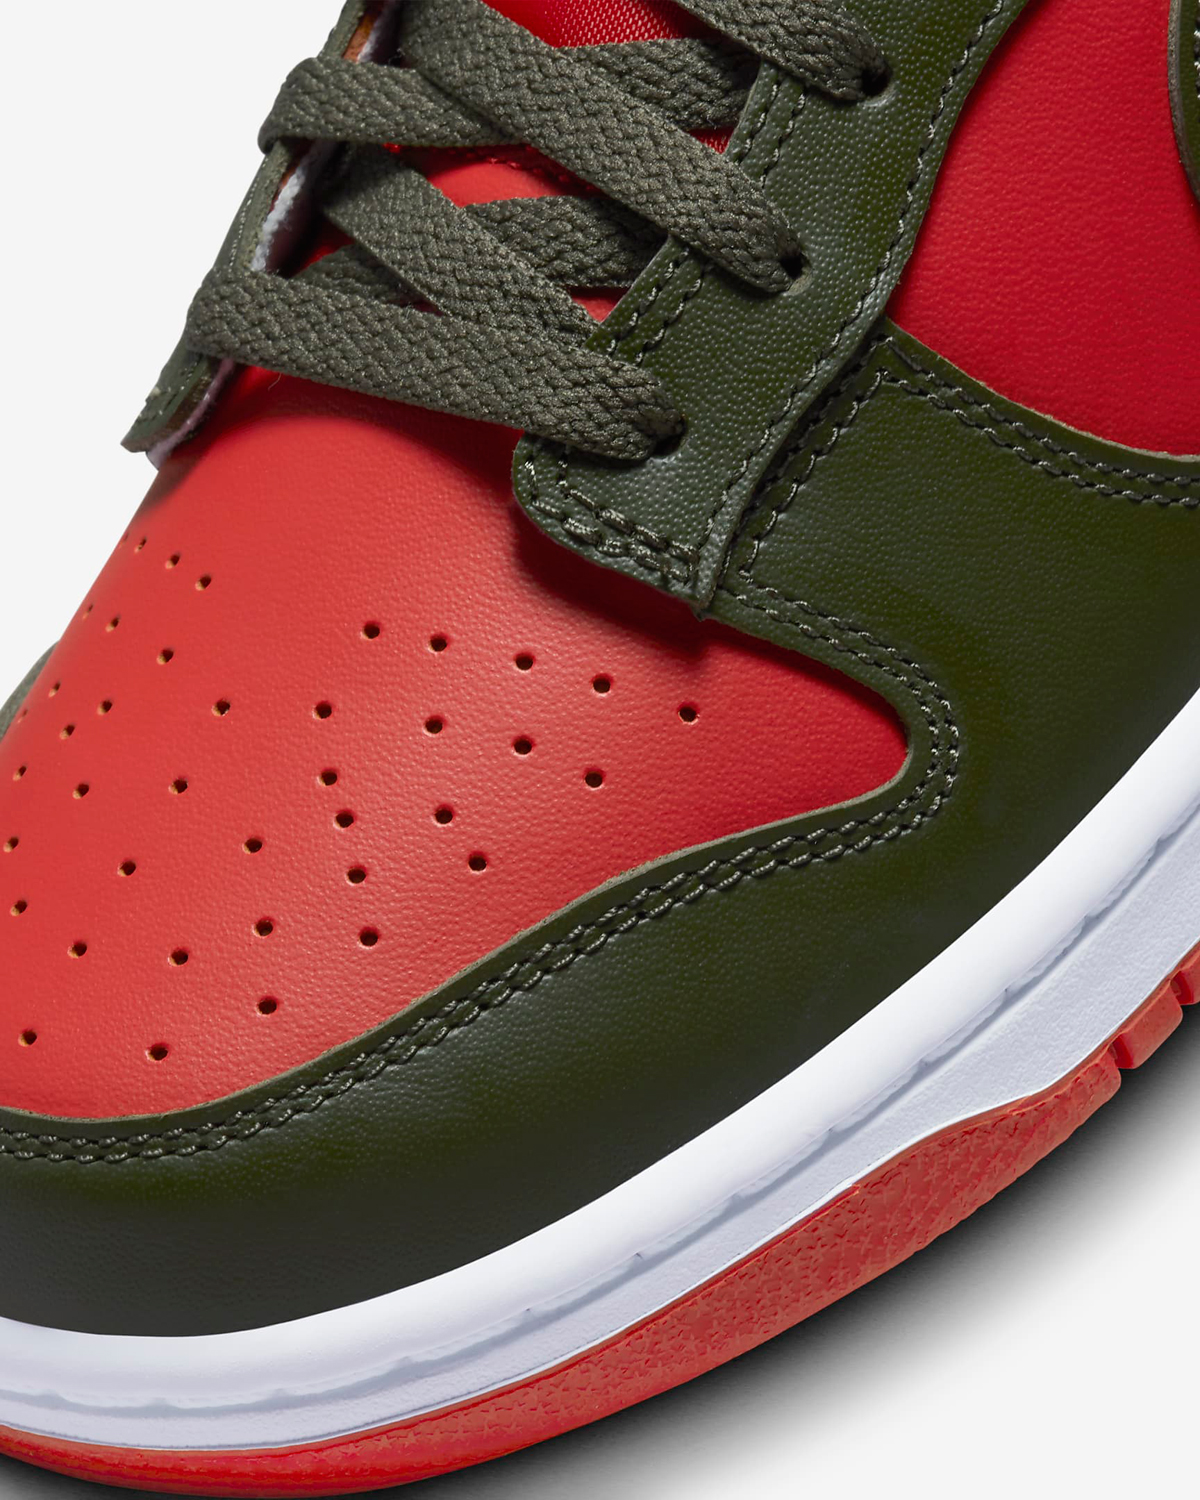 Nike Dunk Low Mystic Red Cargo Khaki Release Date 7